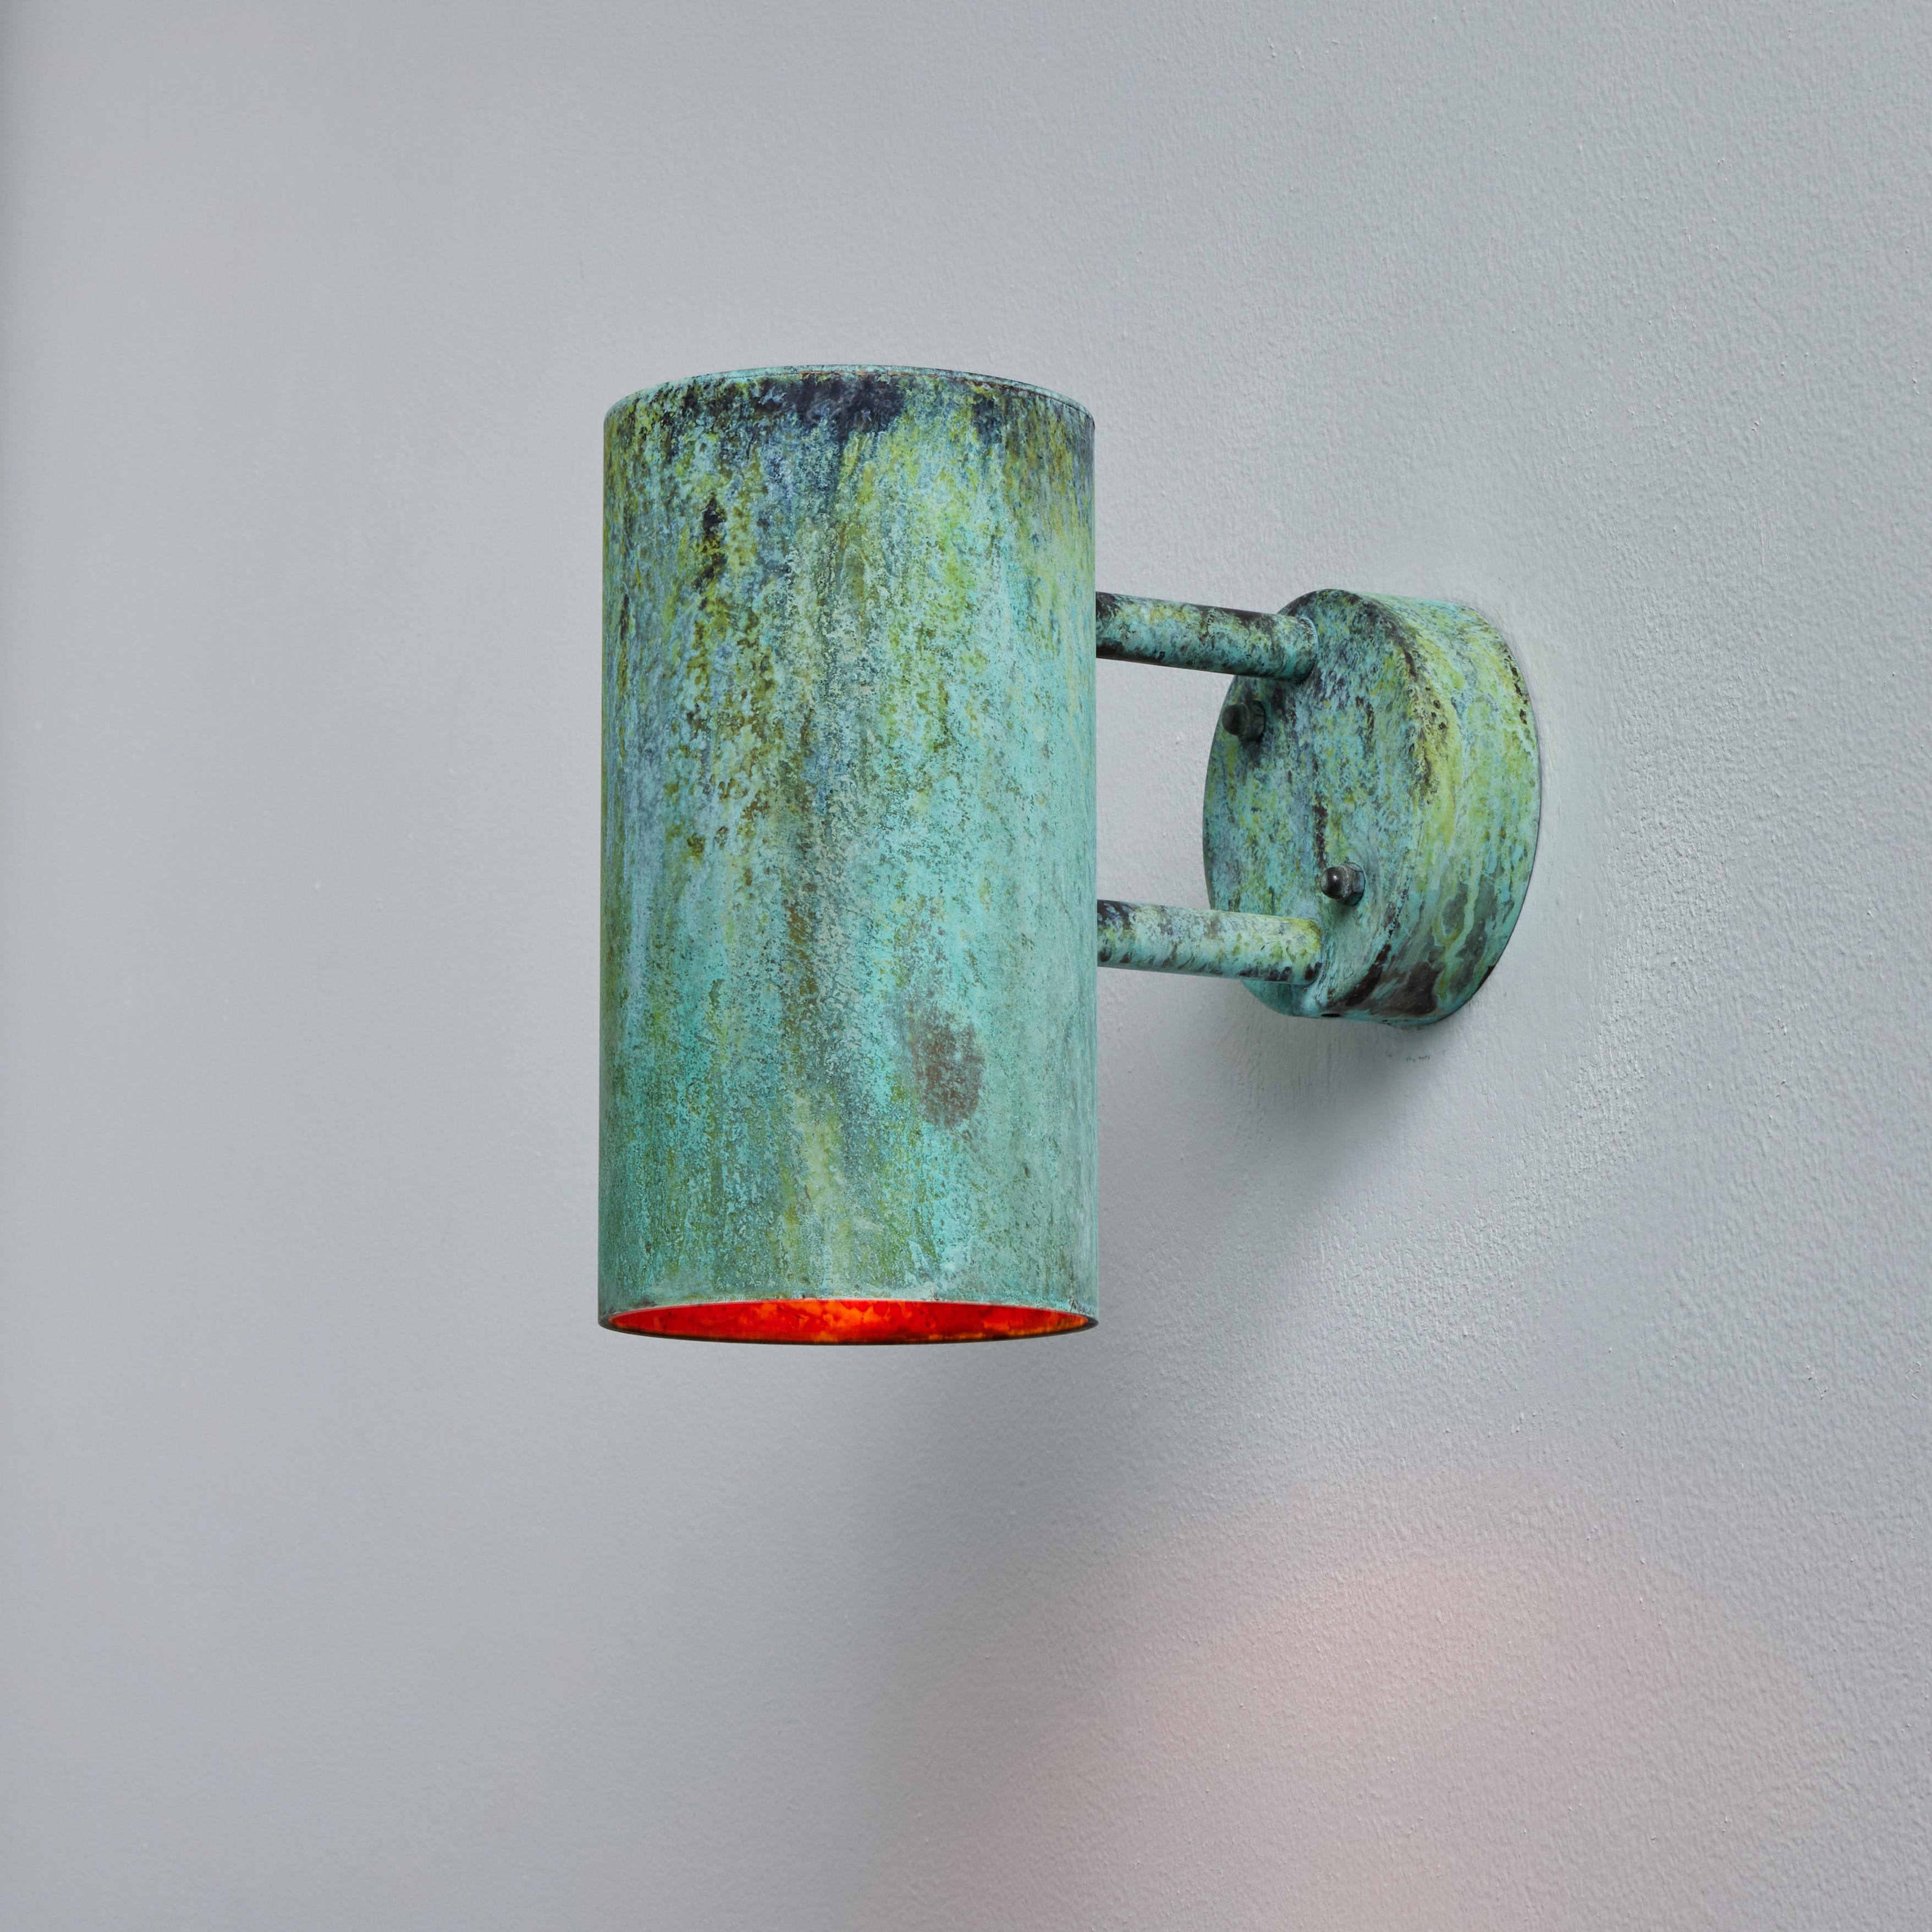 Pair of Hans-Agne Jakobsson C627/110 'Rulle' verdigris patinated outdoor sconces. An exclusive made for U.S. and UL listed authorized re-edition of the classic Swedish design executed in richly patinated metal that will continue to develop a lovely